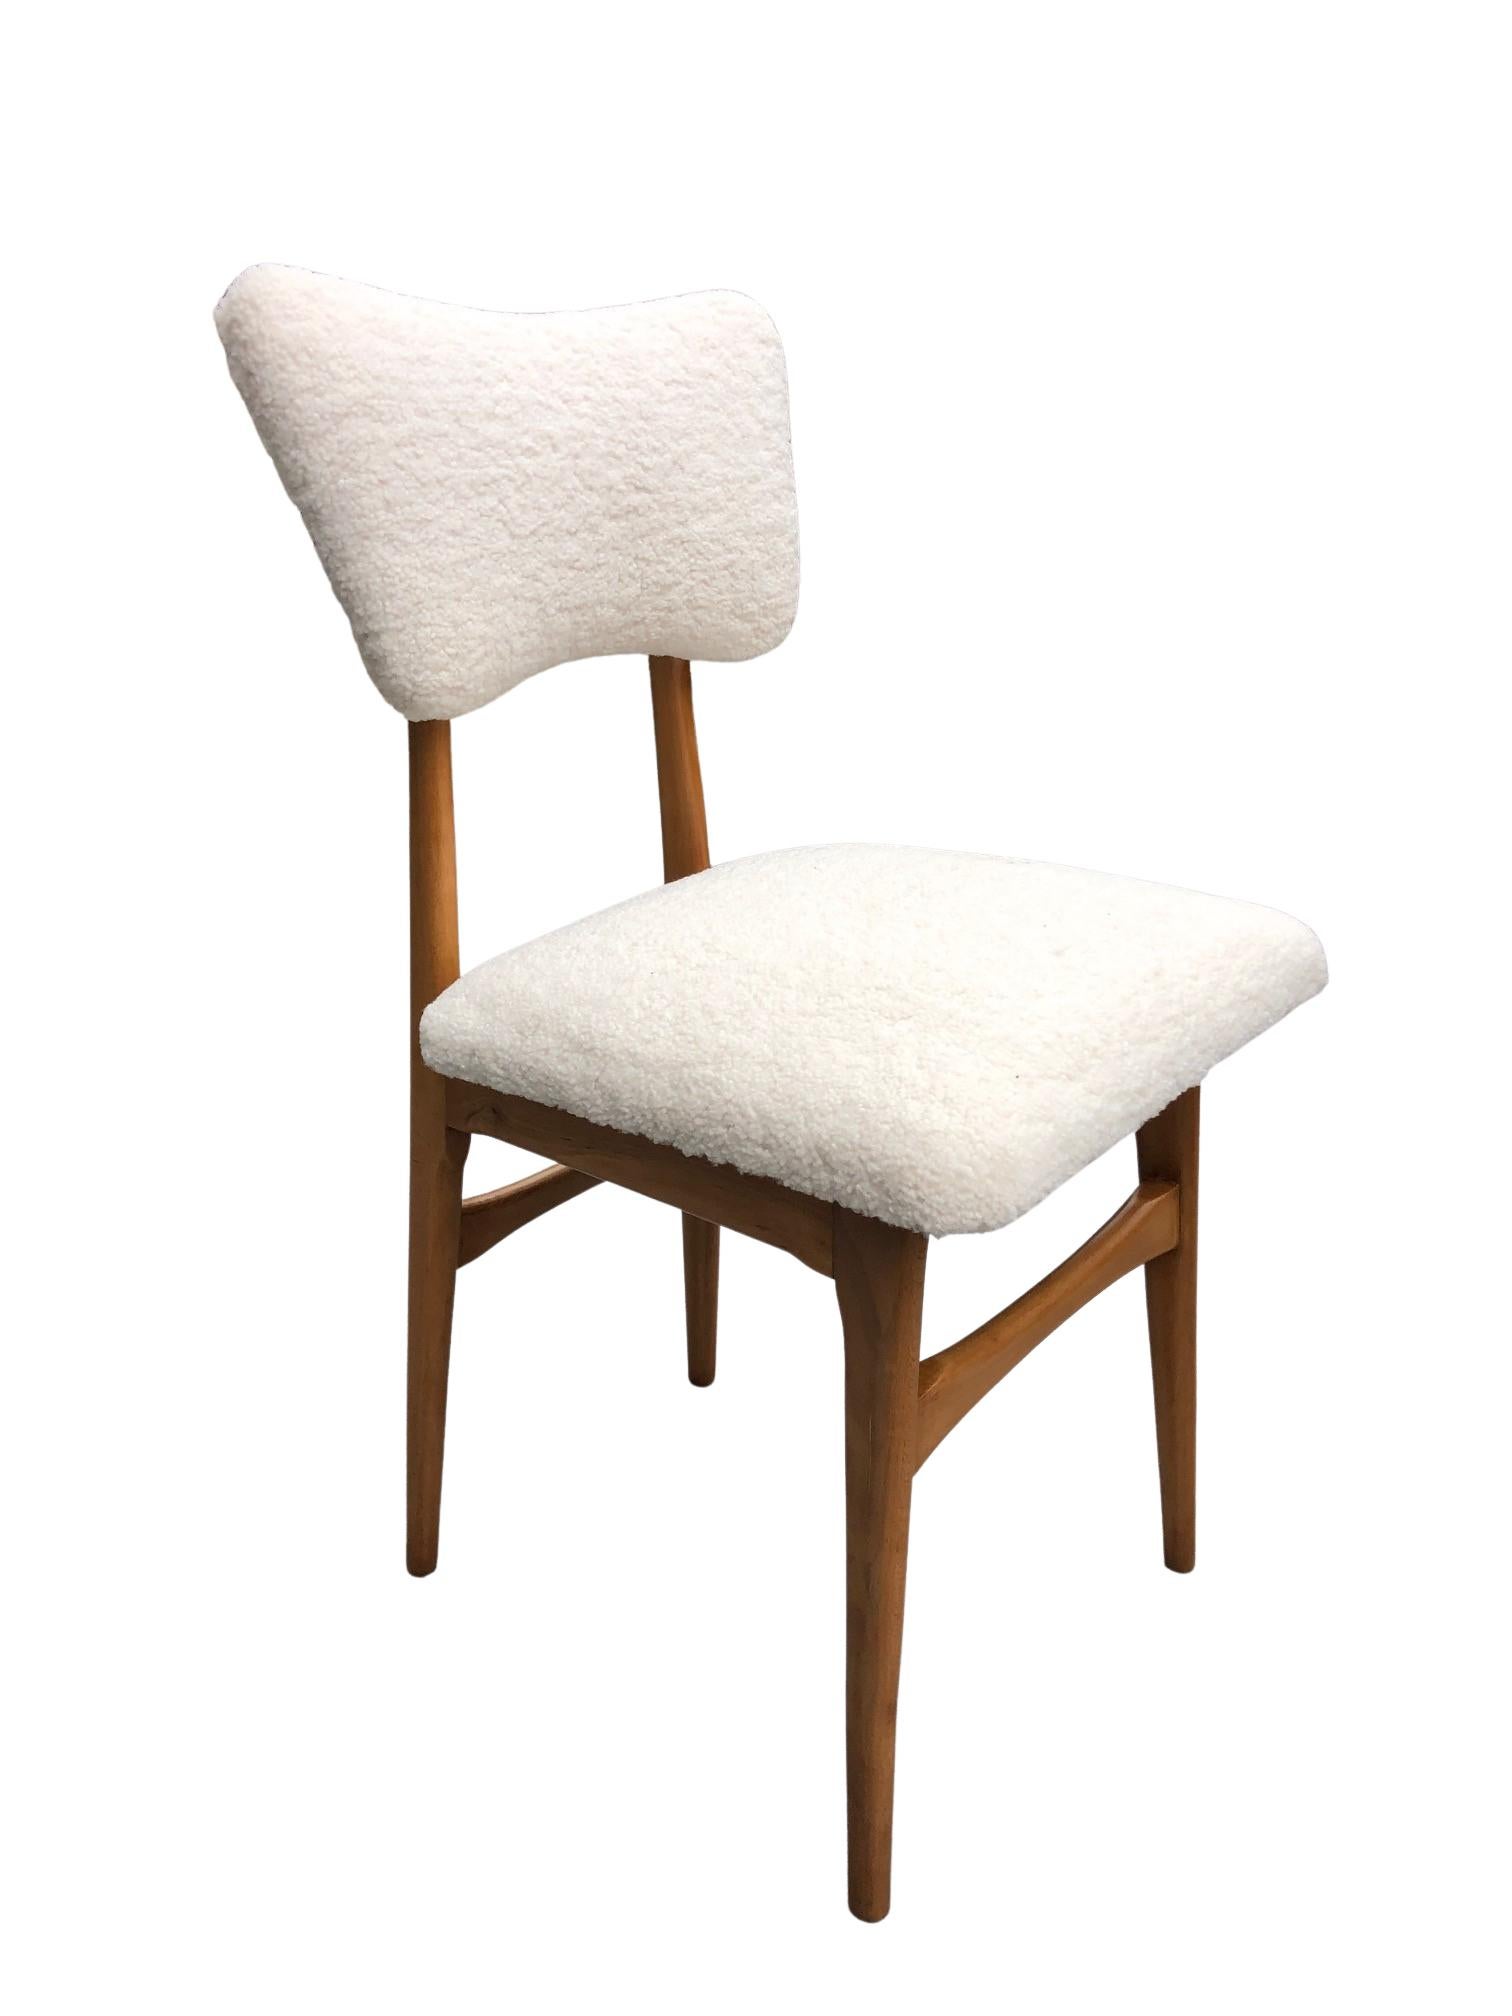 Midcentury Cream Bouclé and Wood Dining Chairs, Europe, 1960s, Set of Two For Sale 6